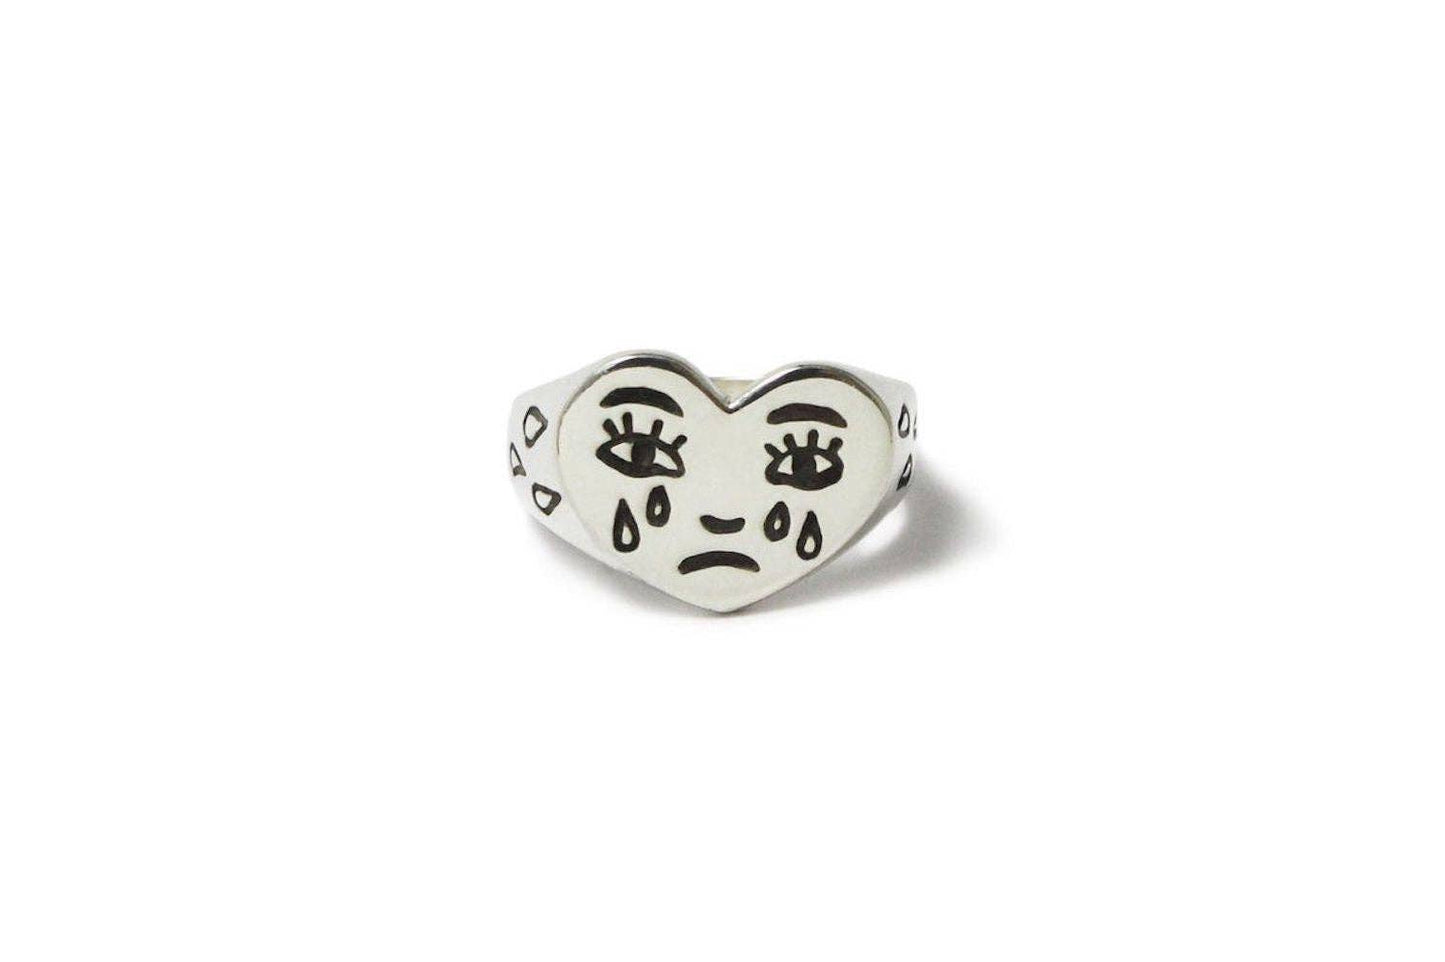 Tears Crying Face Expression Ring: No. 7